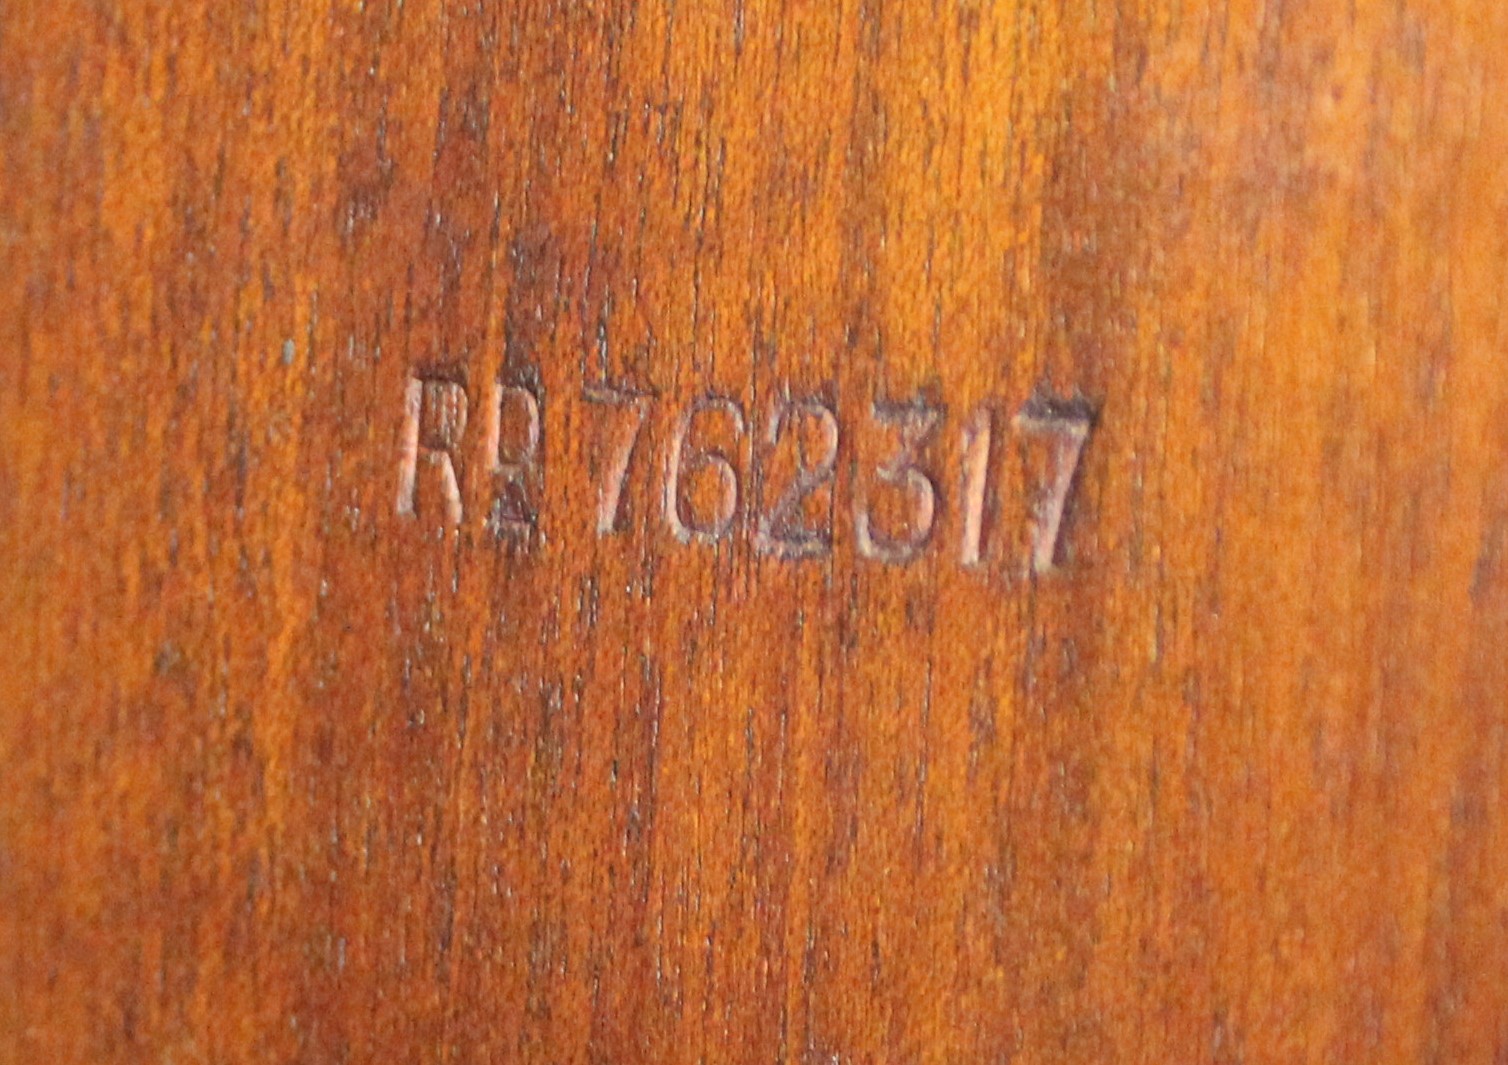 Arts & Crafts oak bookstand / journal rack stamped W A Rathbone, Clyde Street, Liverpool, 68cm h x - Image 5 of 5